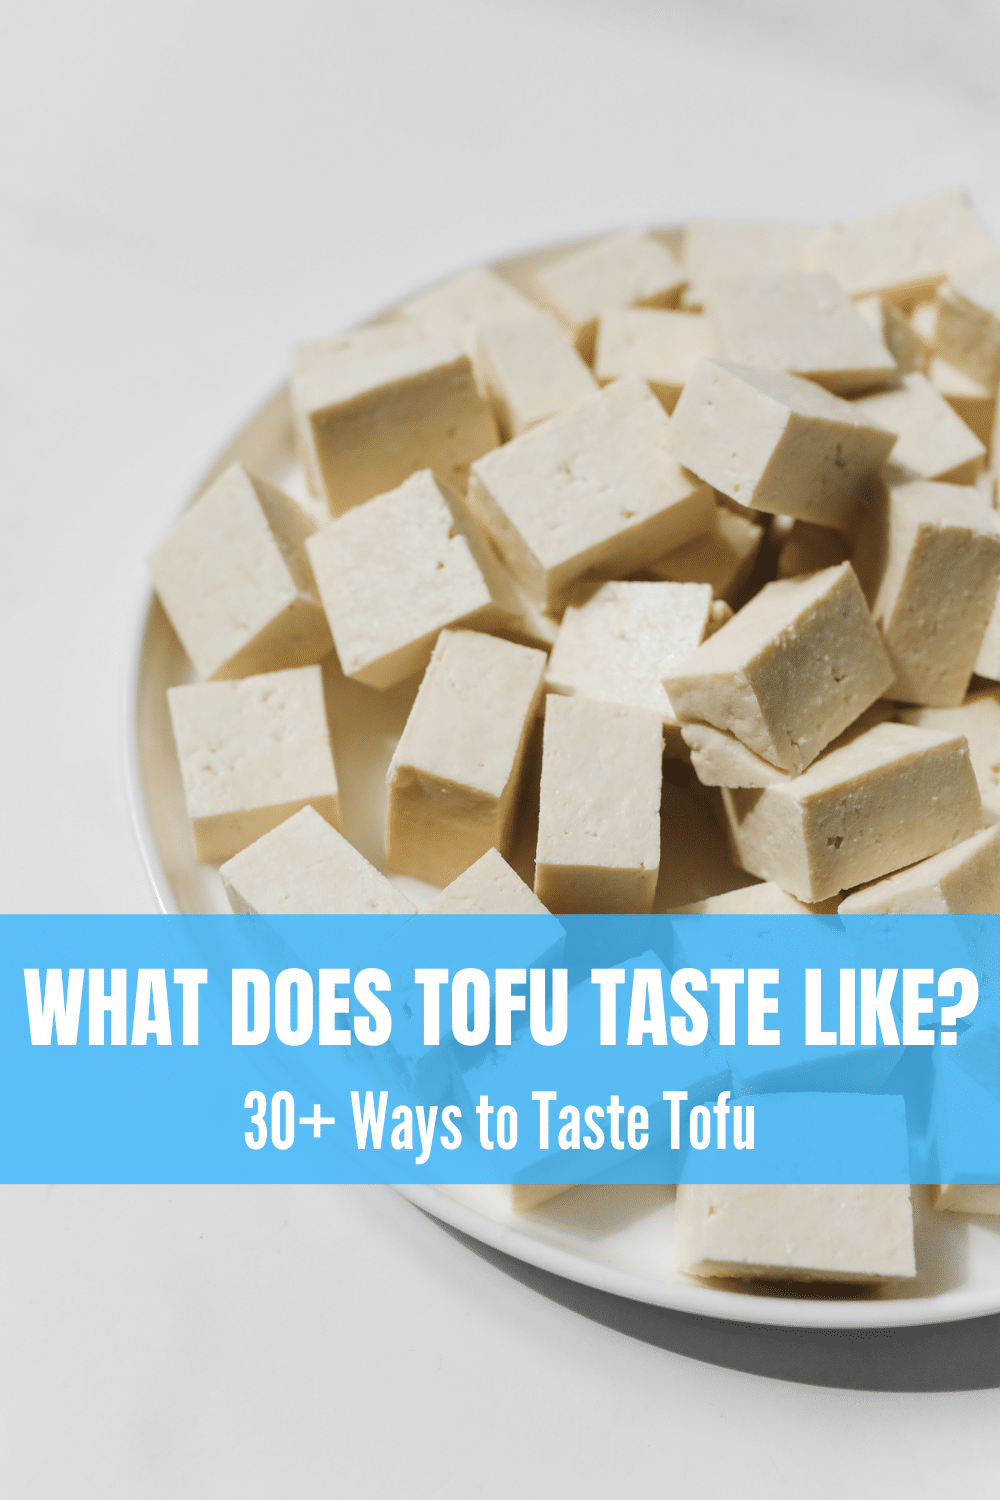 text overlay saying WHAT DOES TOFU TASTE LIKE? over top of raw tofu